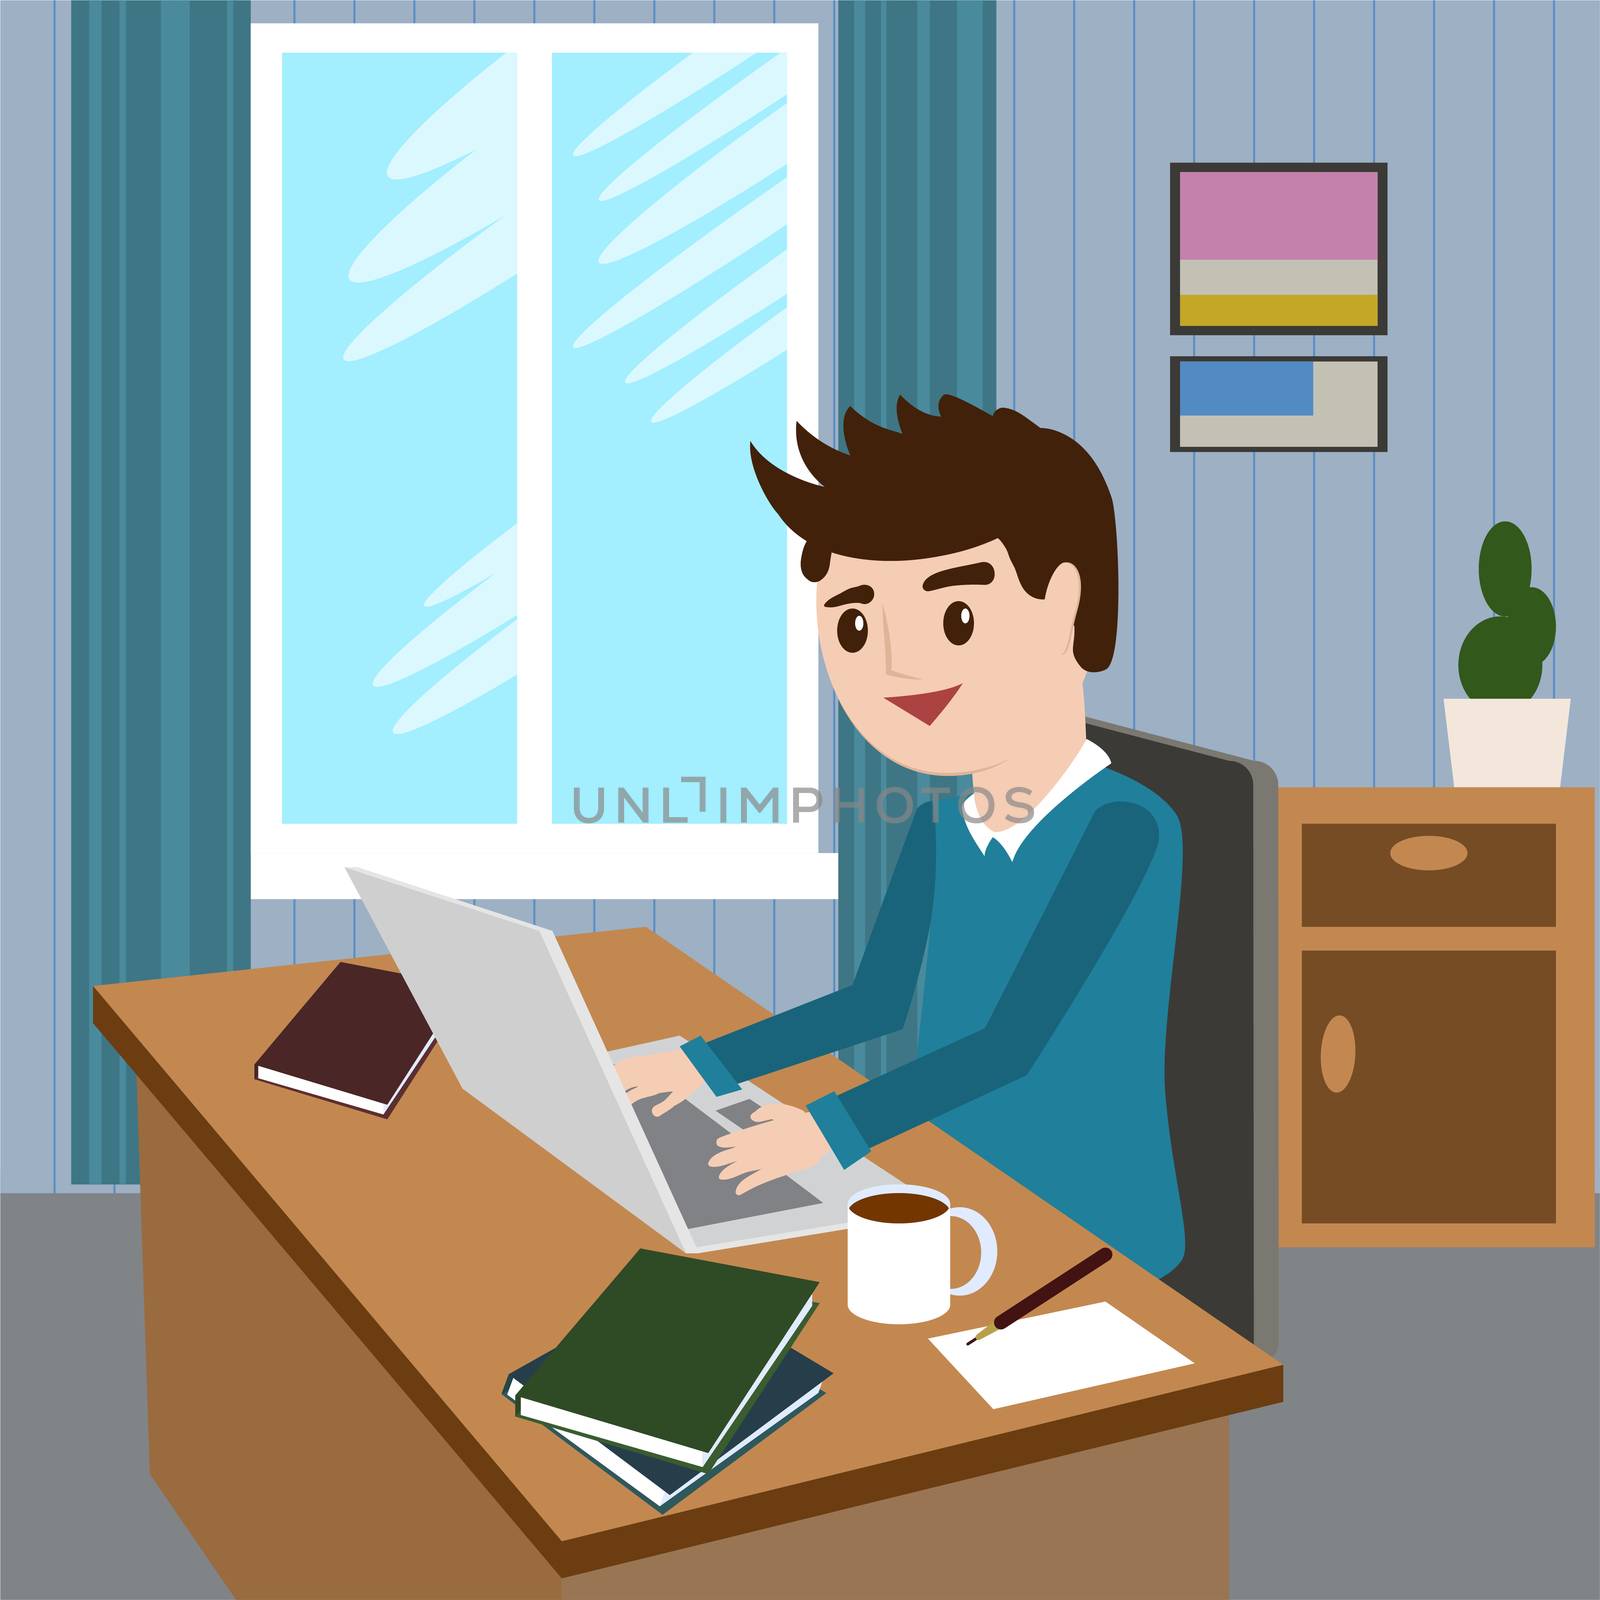 Flat design modern illustration lifestyle concept of handsome man in casual T-shirt sitting at the desk and working on laptop in the office. Isolated on stylish colored background. by Adamchuk